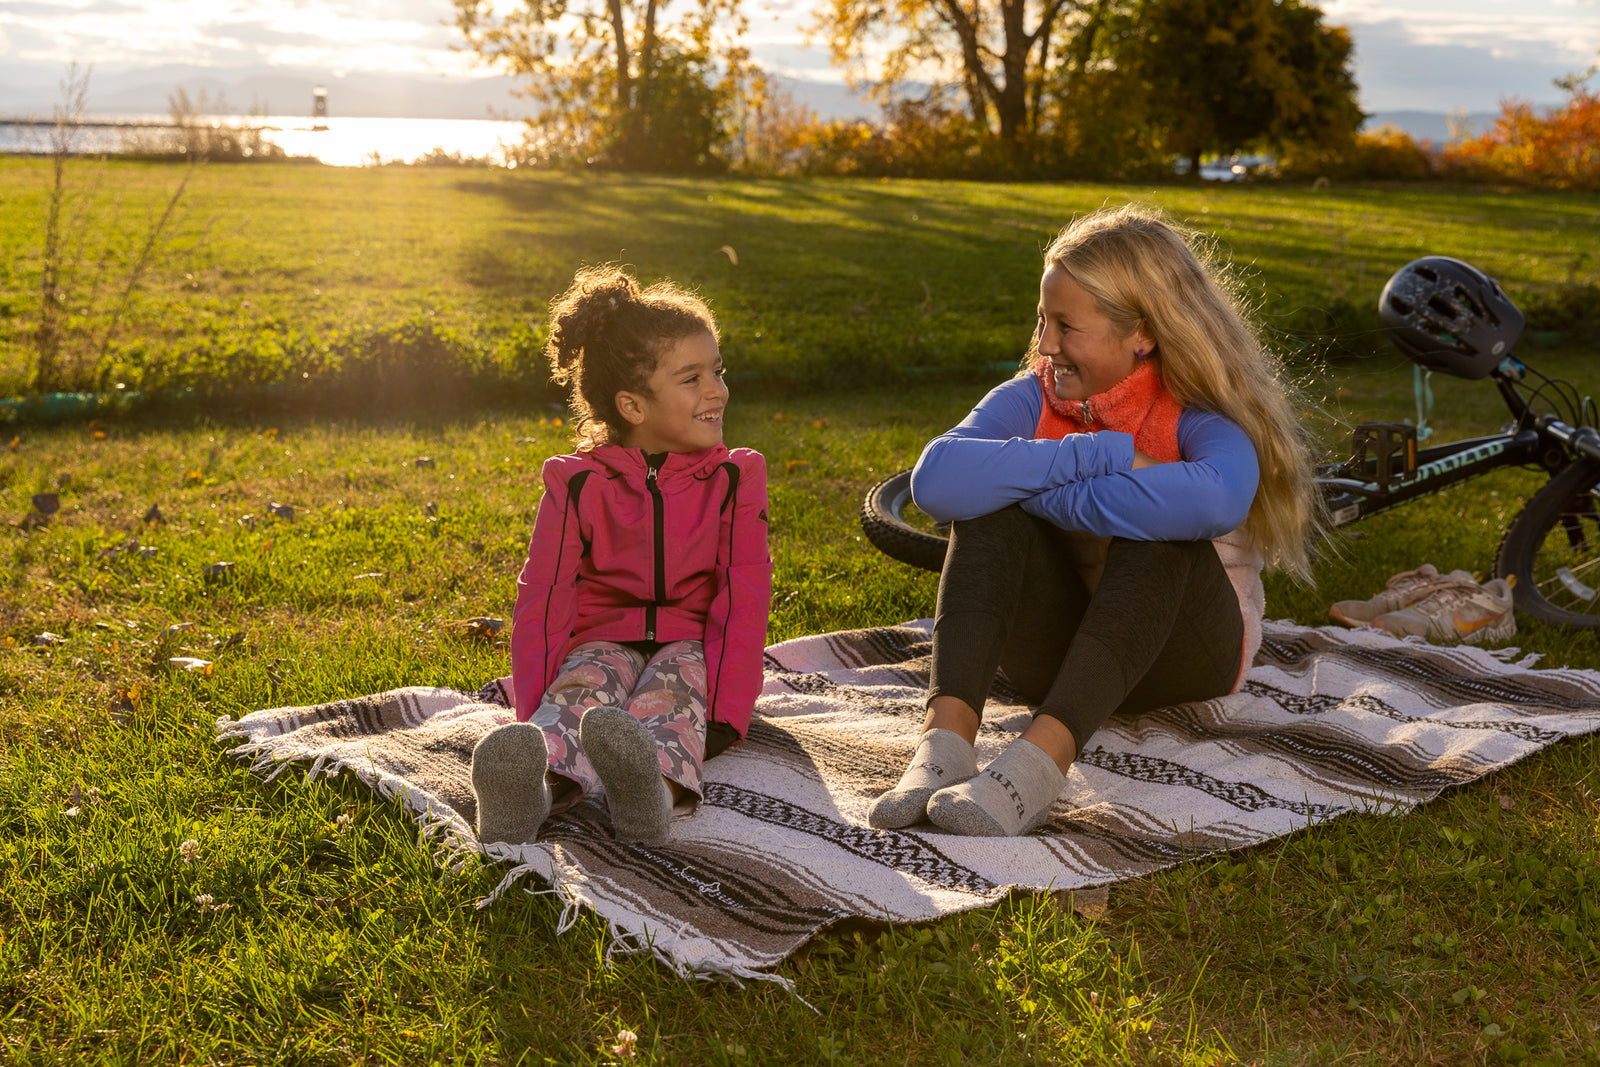 Two young girls are stopped after a bike ride sitting on a blanked with the lake shown behind them.  The younger girl on the left is wearing her bright pink jacket and floral pants with her light grey Purra No Show Socks and the older girl on the right with the bicycle behind her in her bright orange and blue jacket and dark colored pants is also wearing her No Show light grey socks.